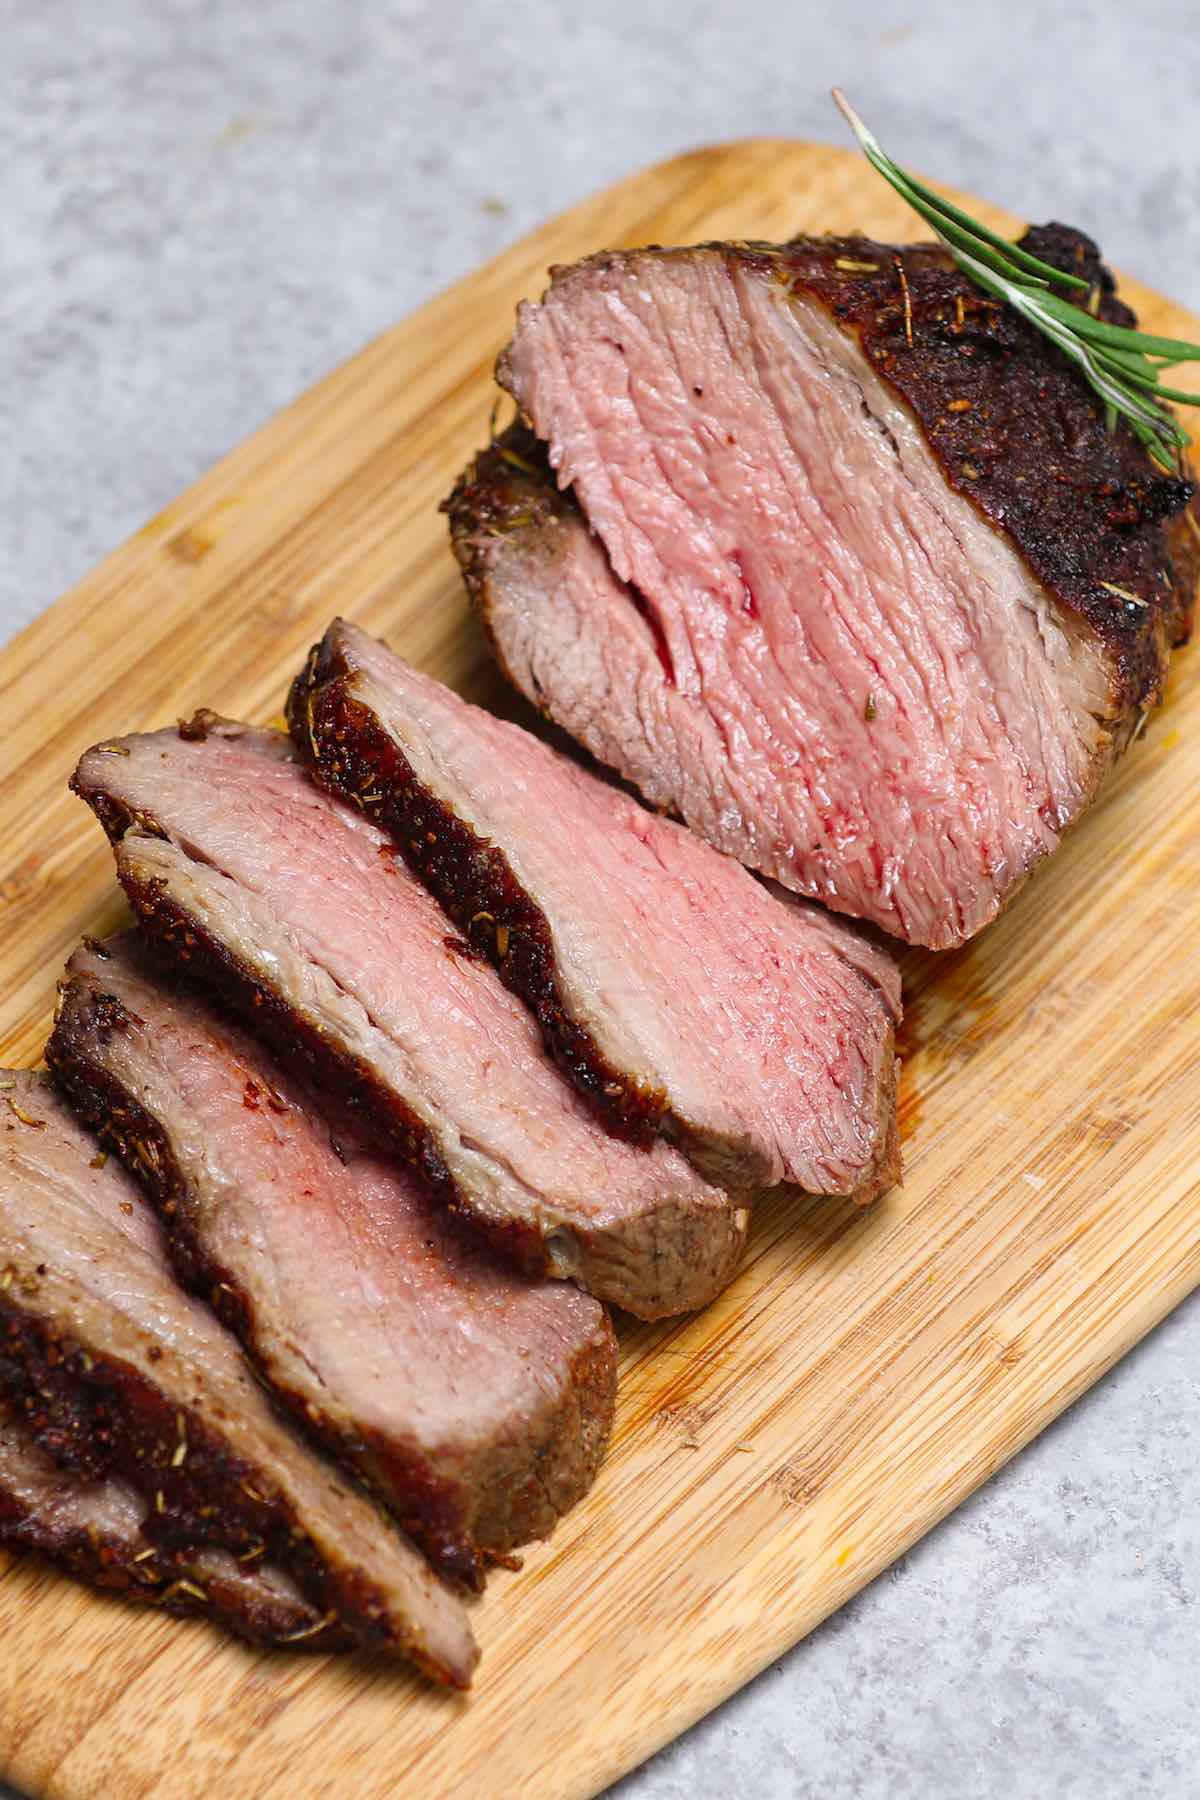 Slices of sirloin roast on a carving board showing medium doneness with a pale pink interior